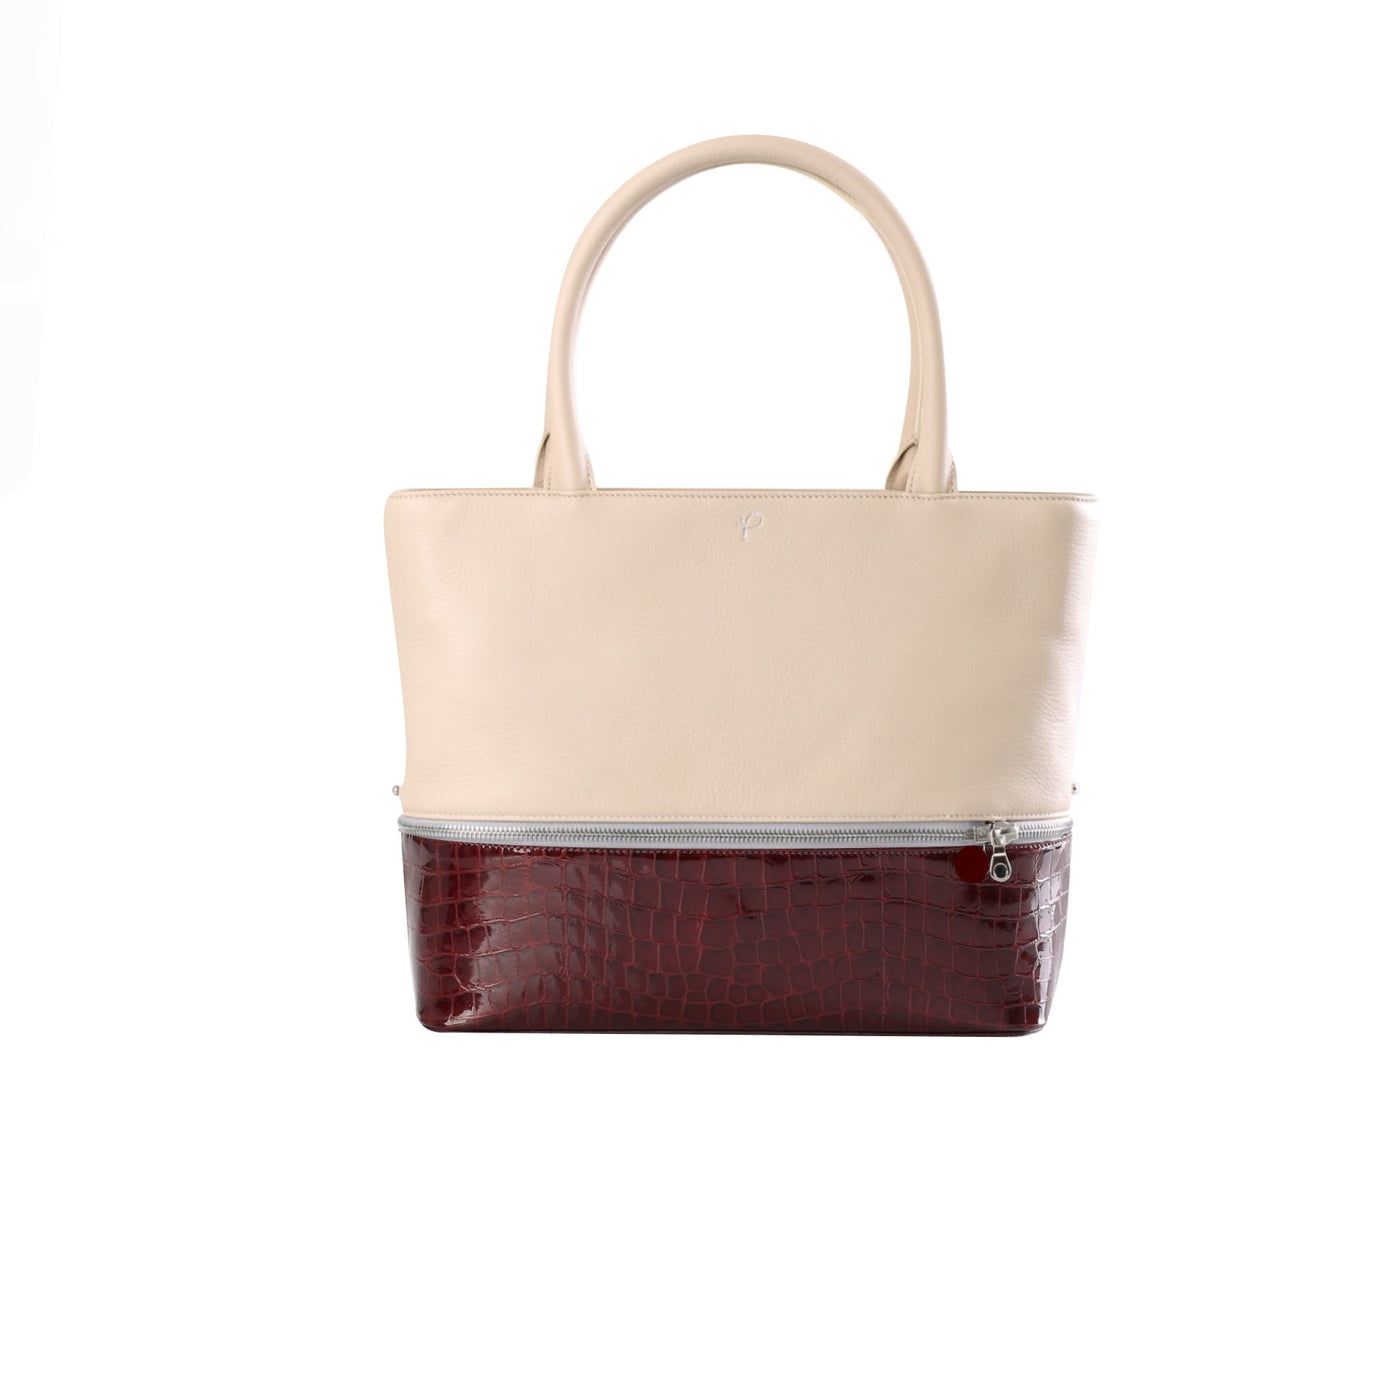 Bag with two bases (long and short) - The Clothing LoungePURSEnality